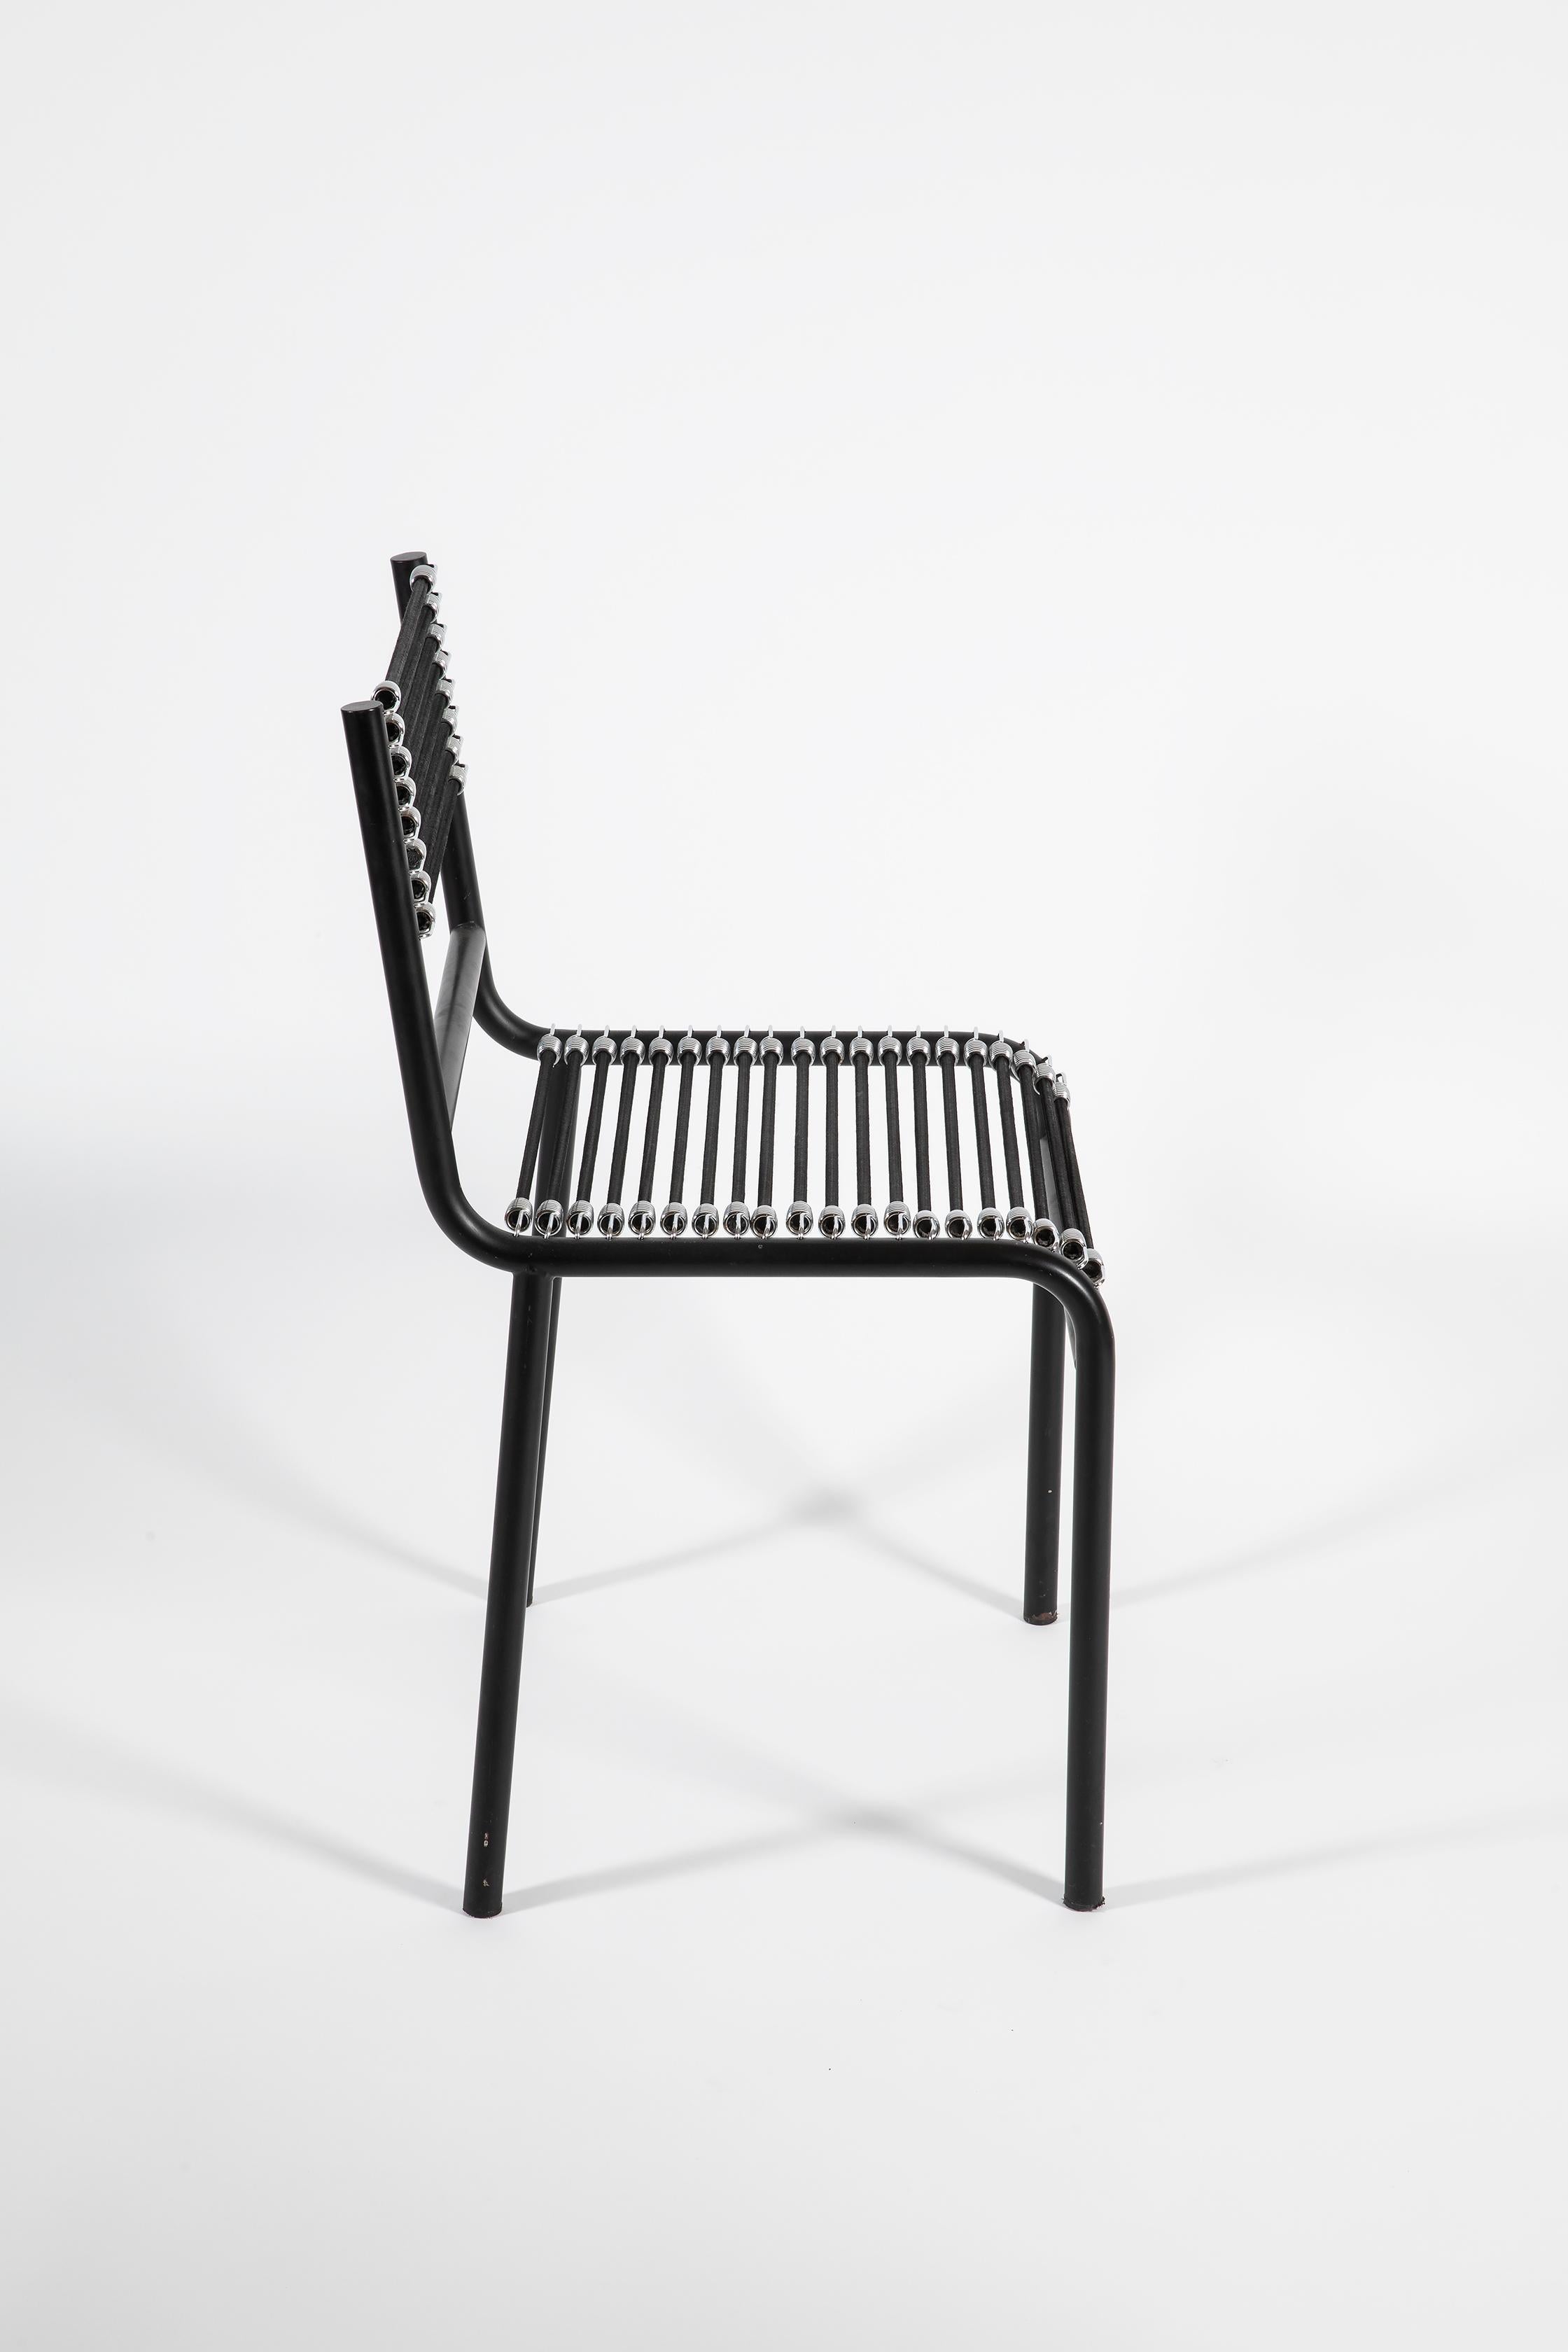 Plated René Herbst Set of Four Black Steel and Rubber Sandow Chairs for Pallucco, 1980s For Sale